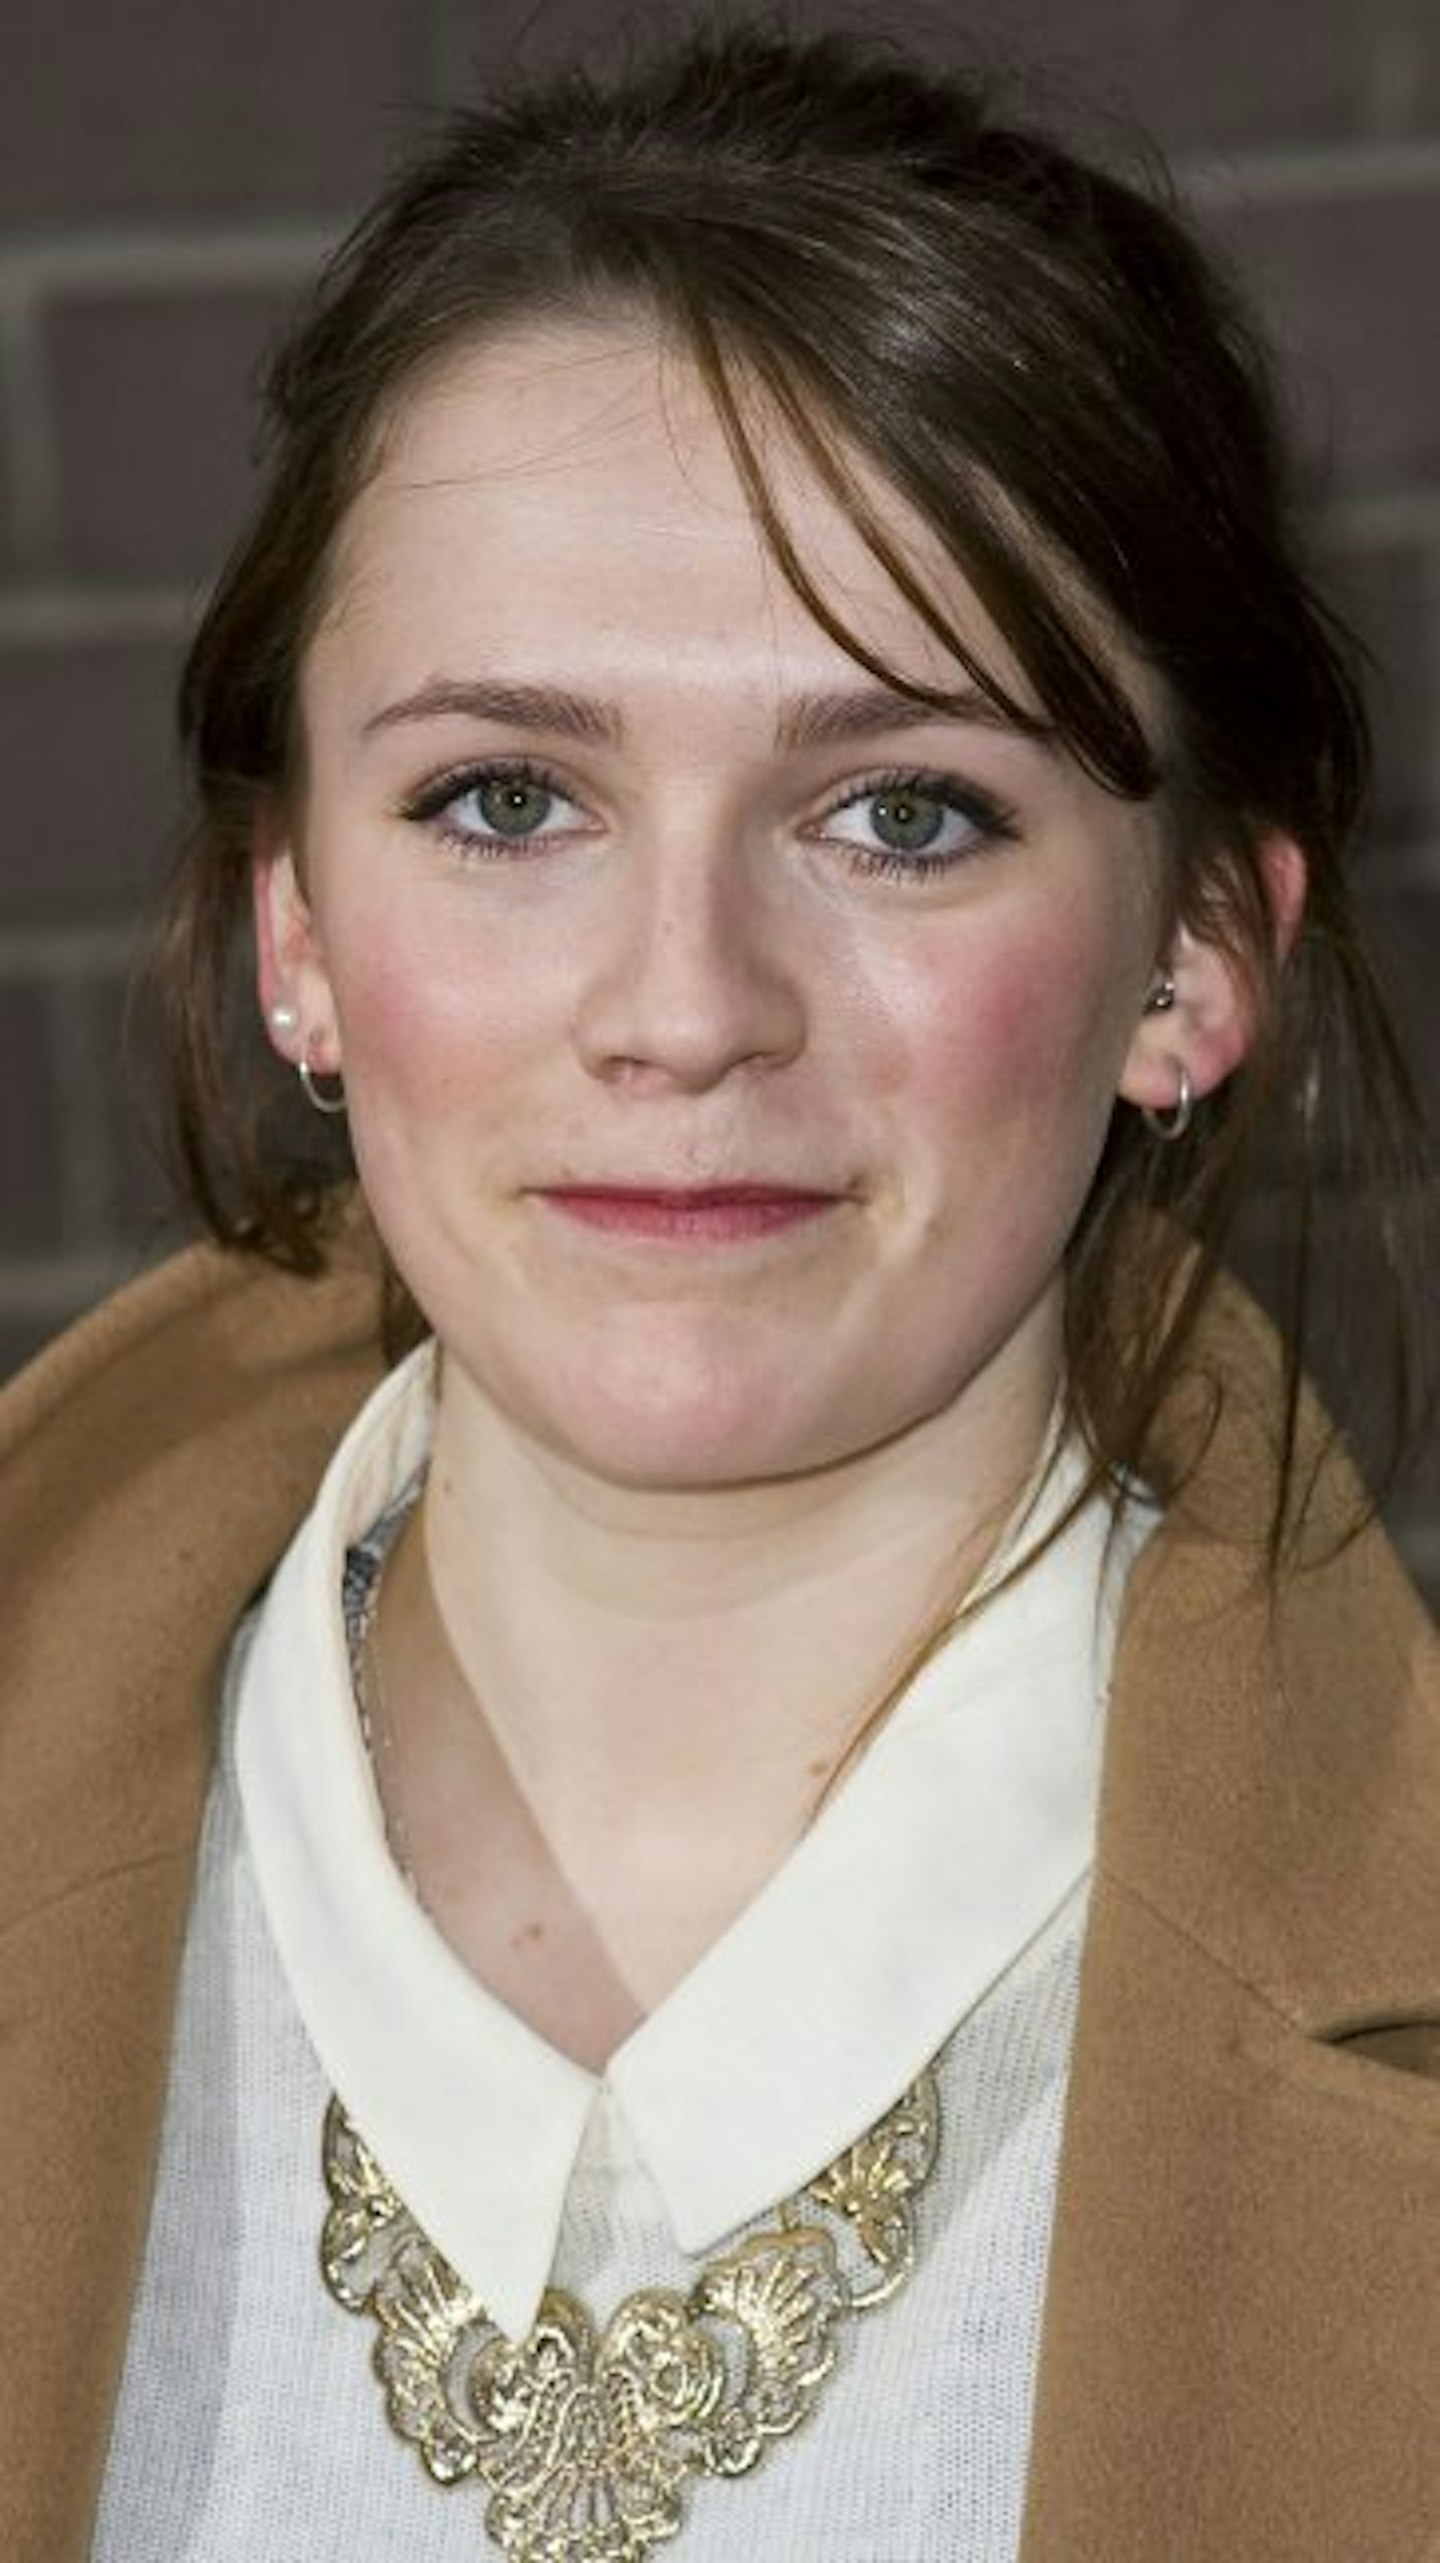 Charlotte Ritchie, who plays Oregon in Channel 4's Fresh Meat